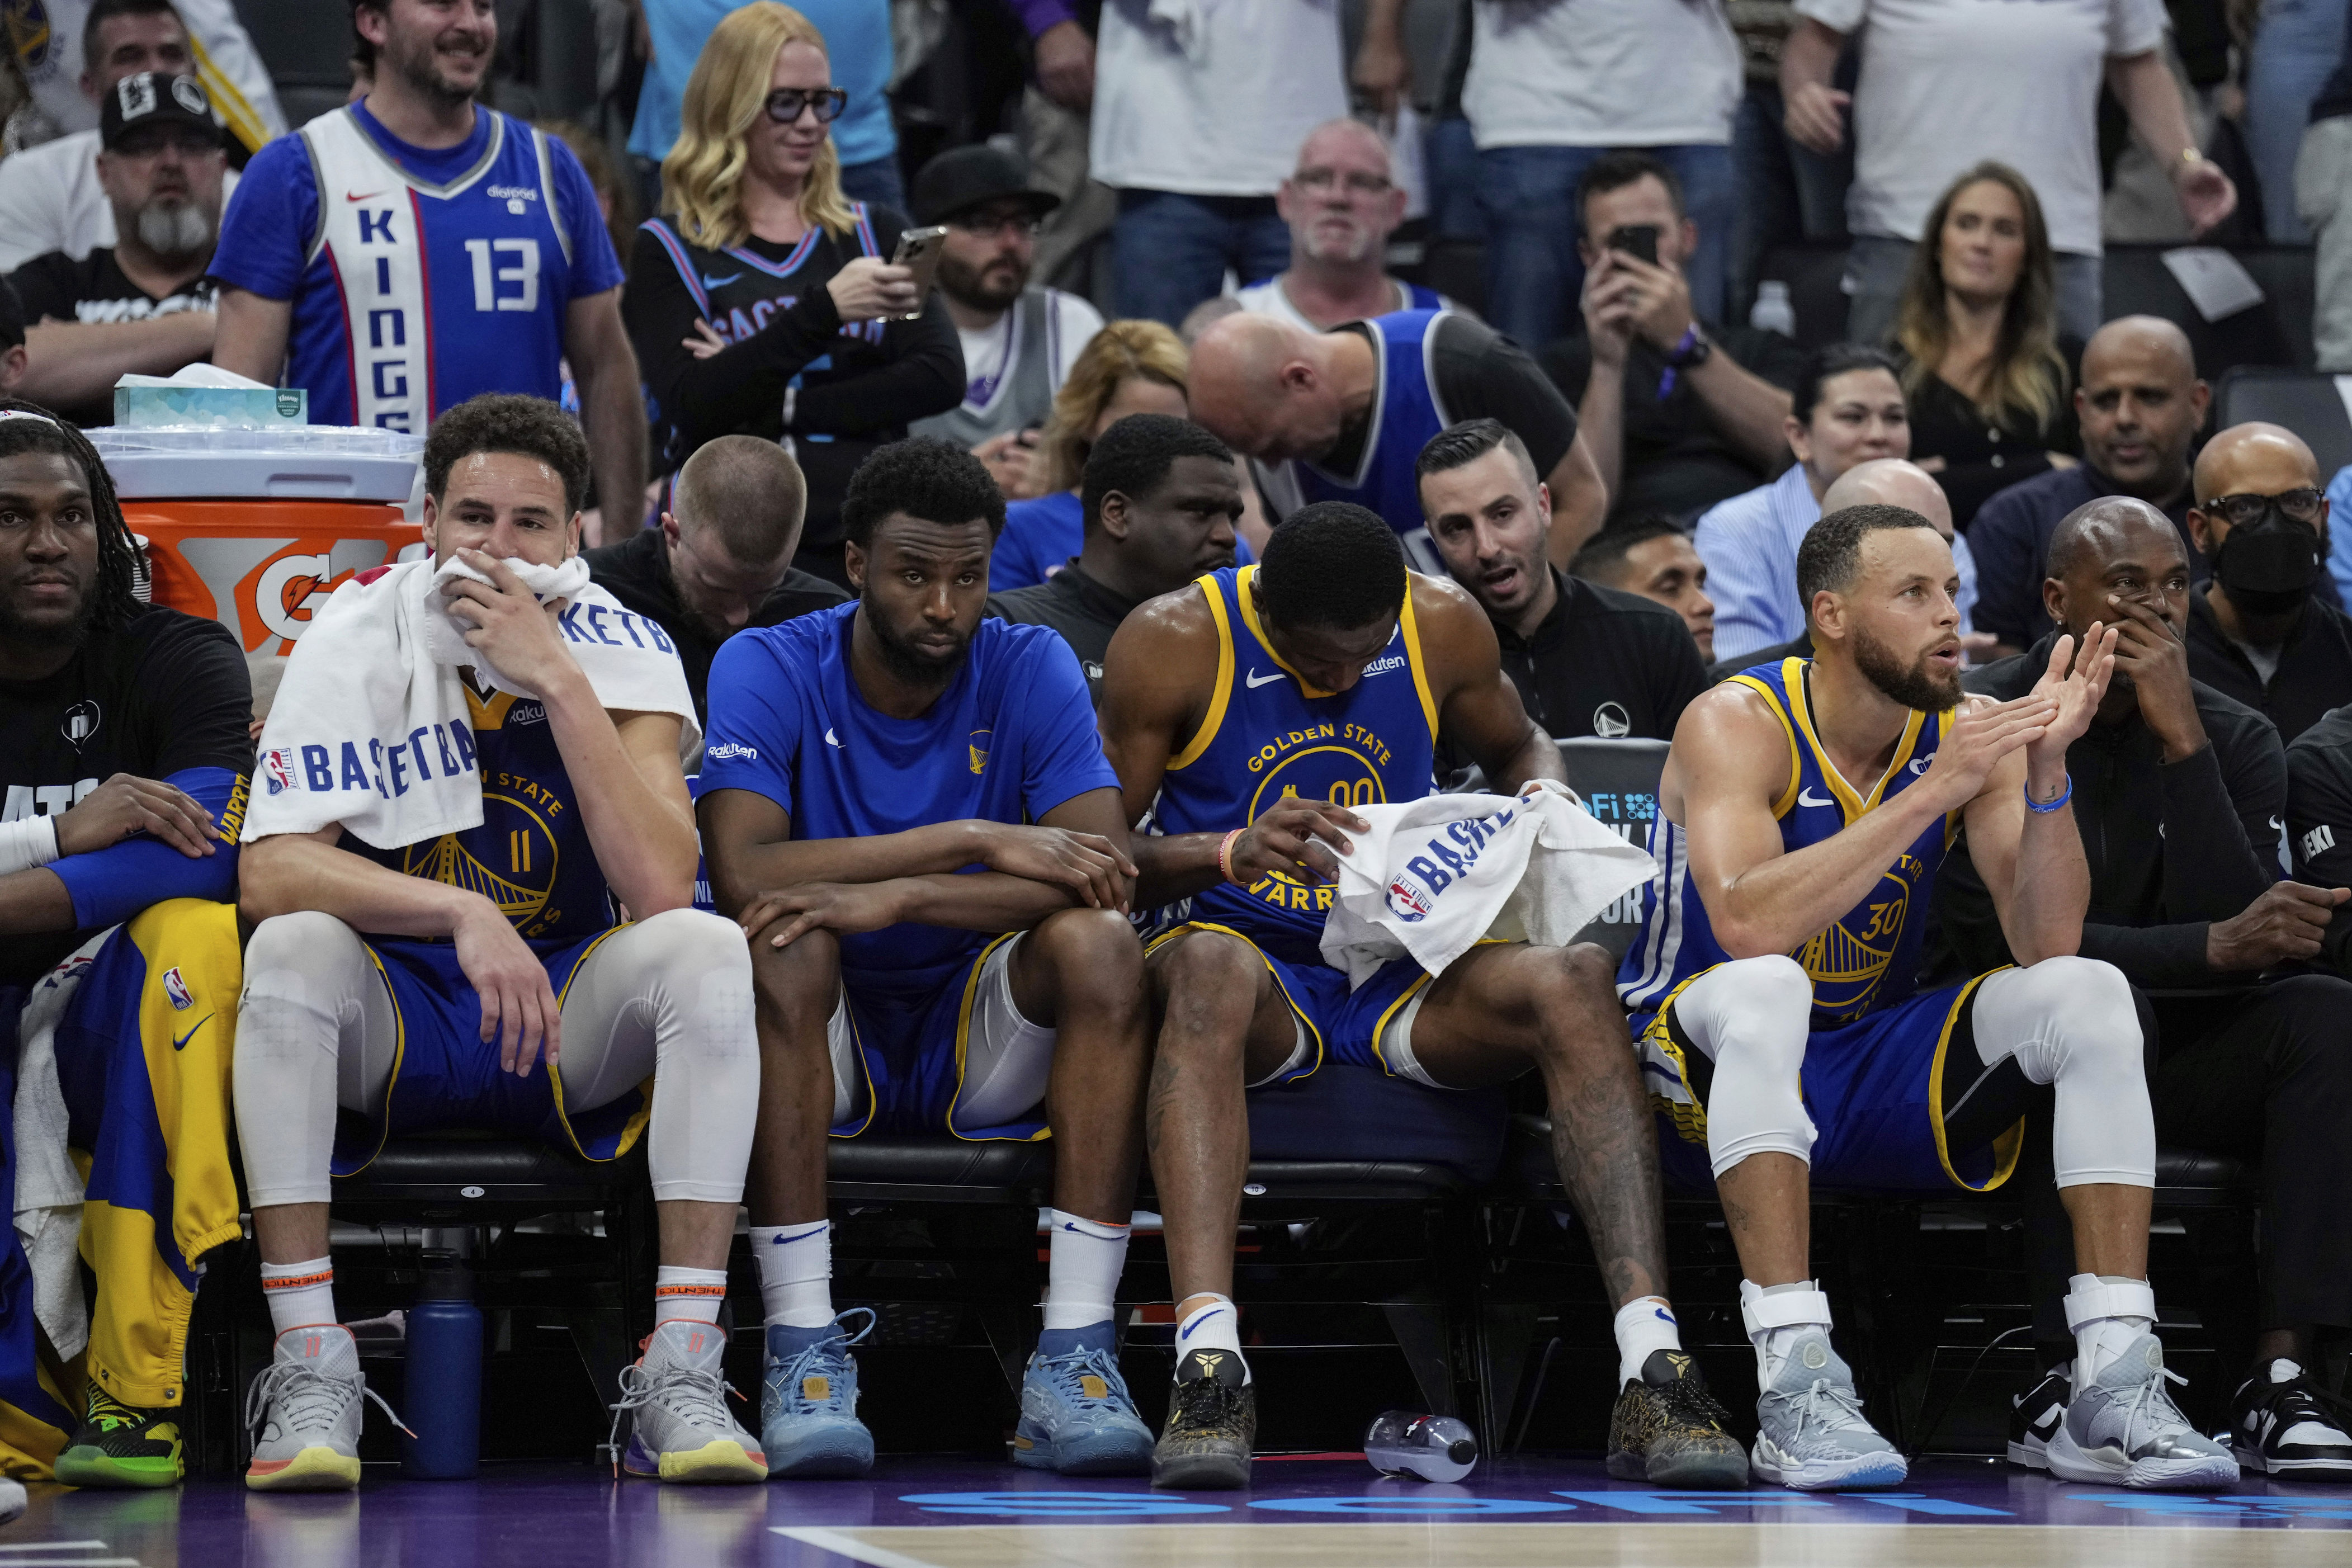 nba: klay thompson scoreless in possible final game with warriors